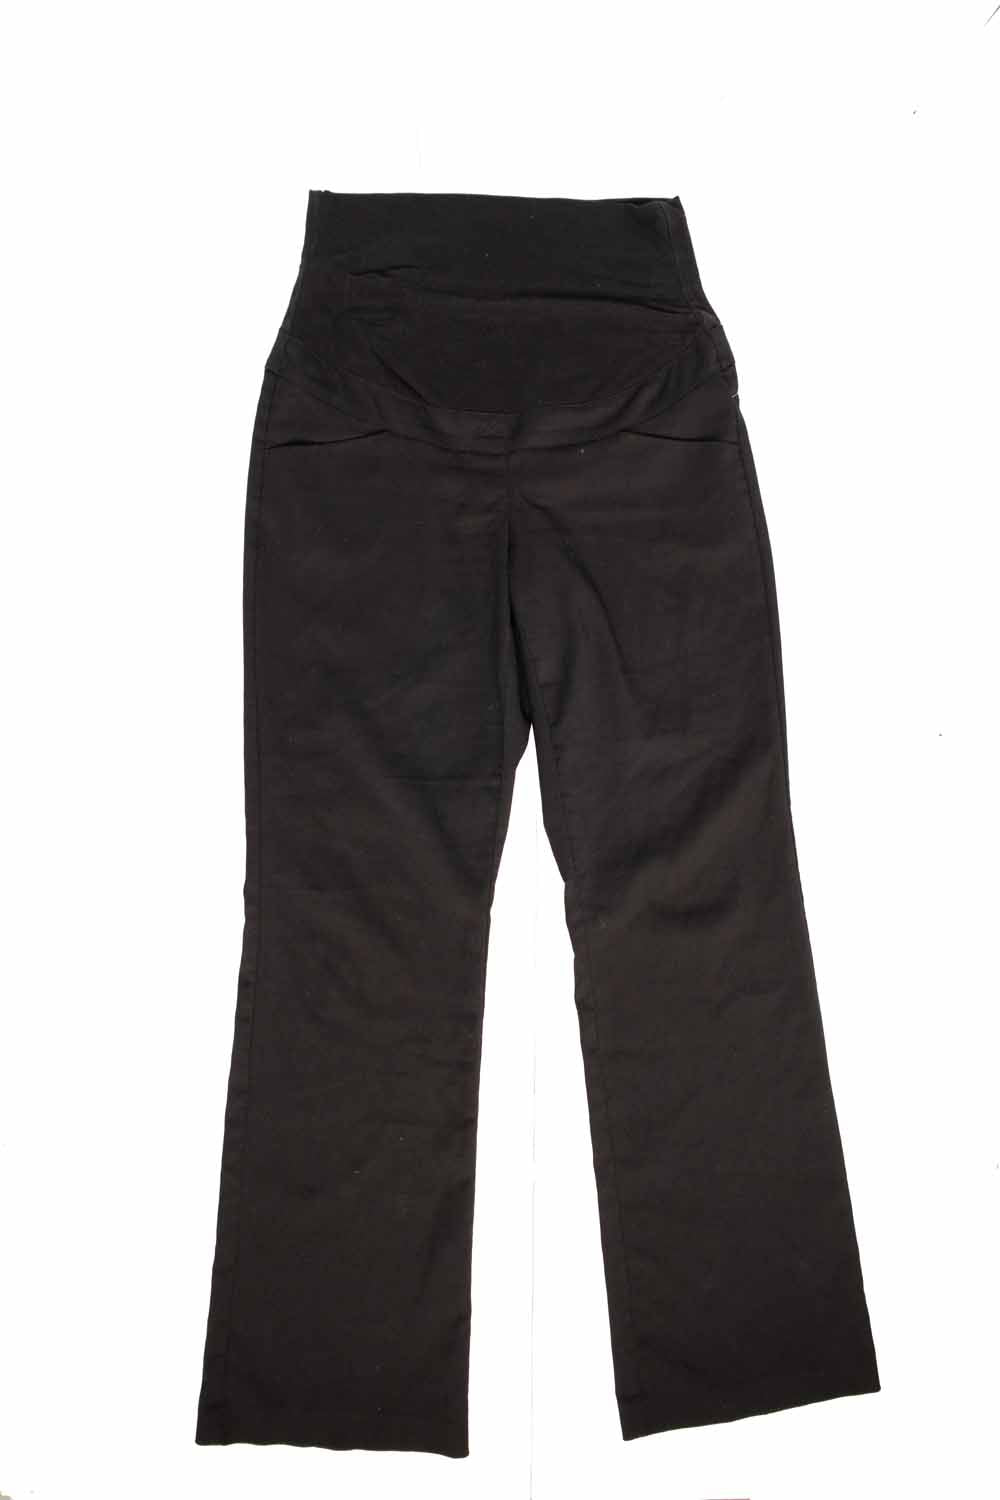 Thyme Maternity Dress Pant Black Size Small Work clothes. Affordable Canadian Pregnant Pregnancy clothes sustainable maternity preloved 